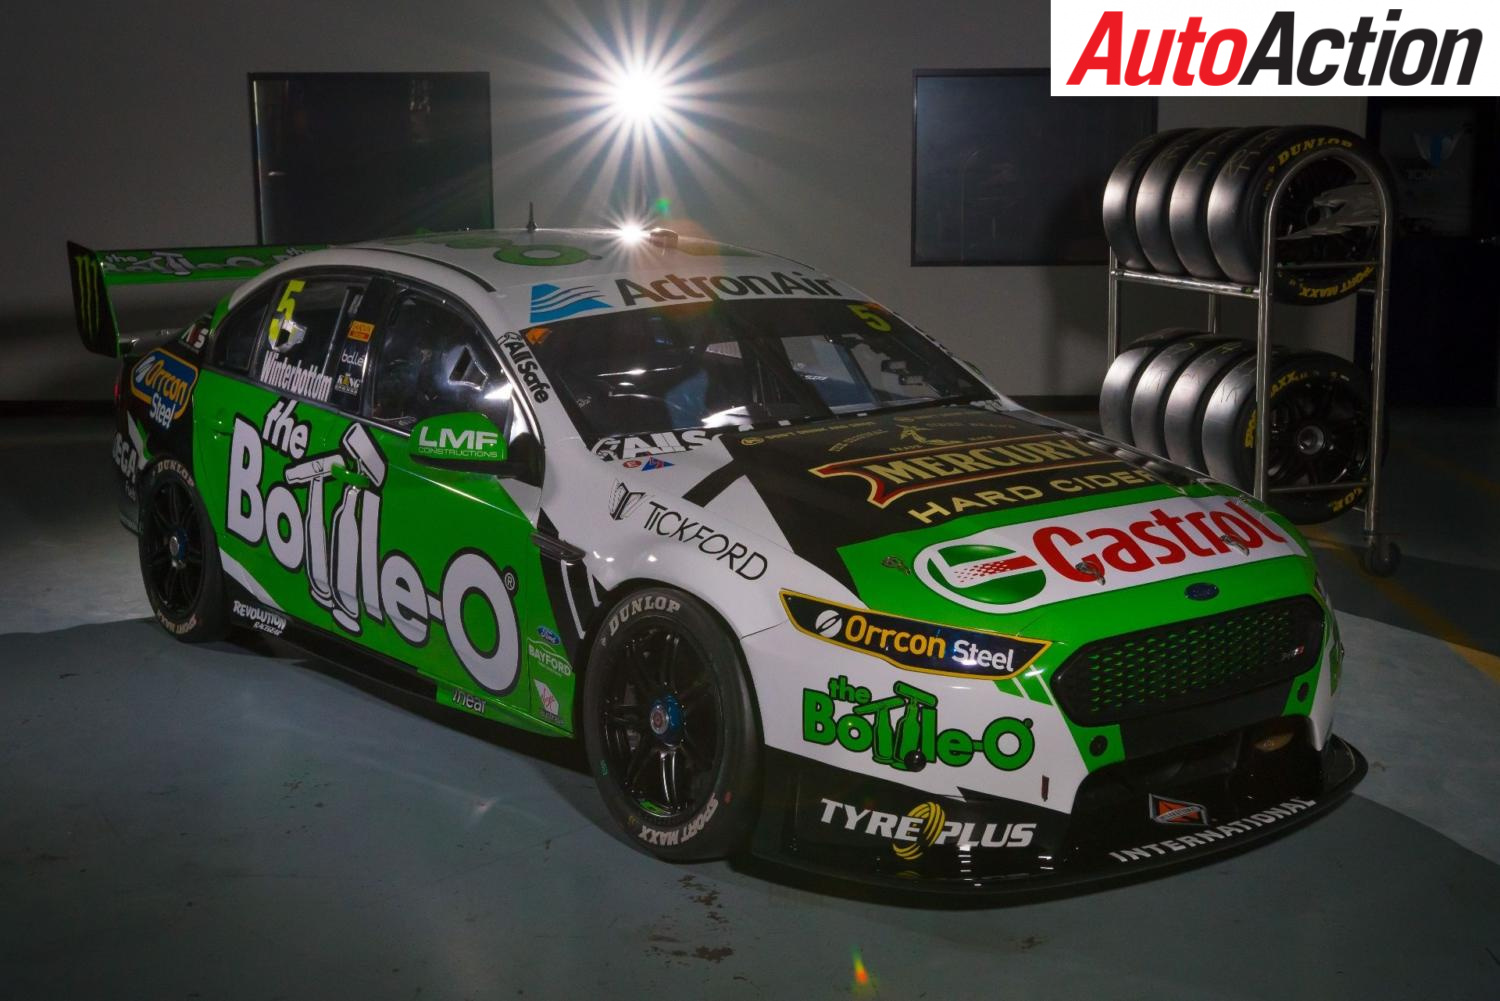 Mark Winterbottom's Tickford Racing Bottle-O Ford Falcon - Photo: Supplied